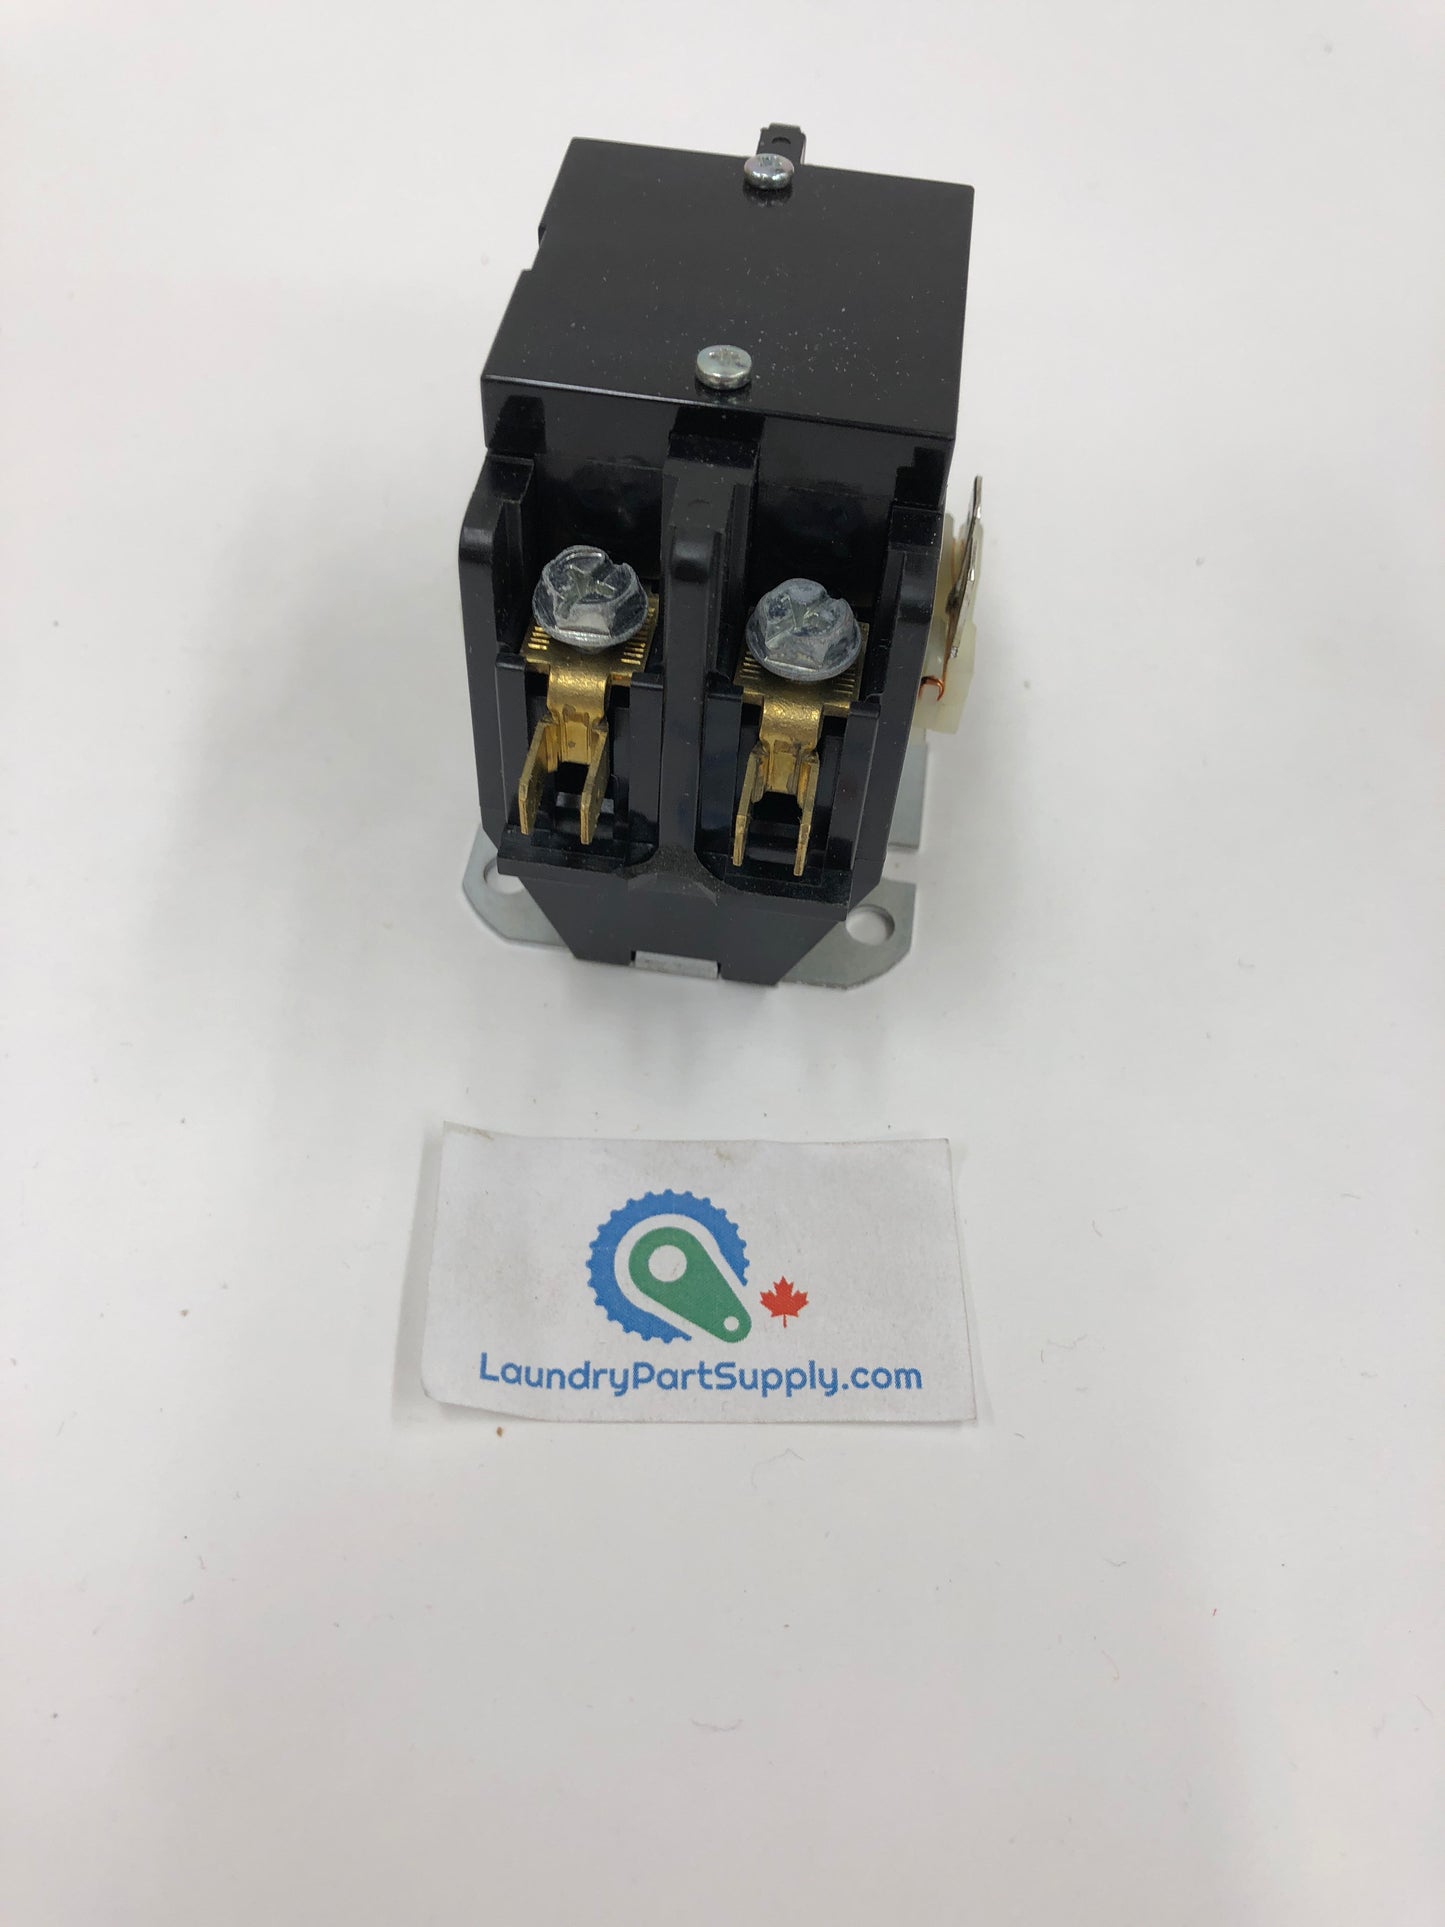 CONTACTOR 2-POLE 30 AMP W/INSTRUCTIONS